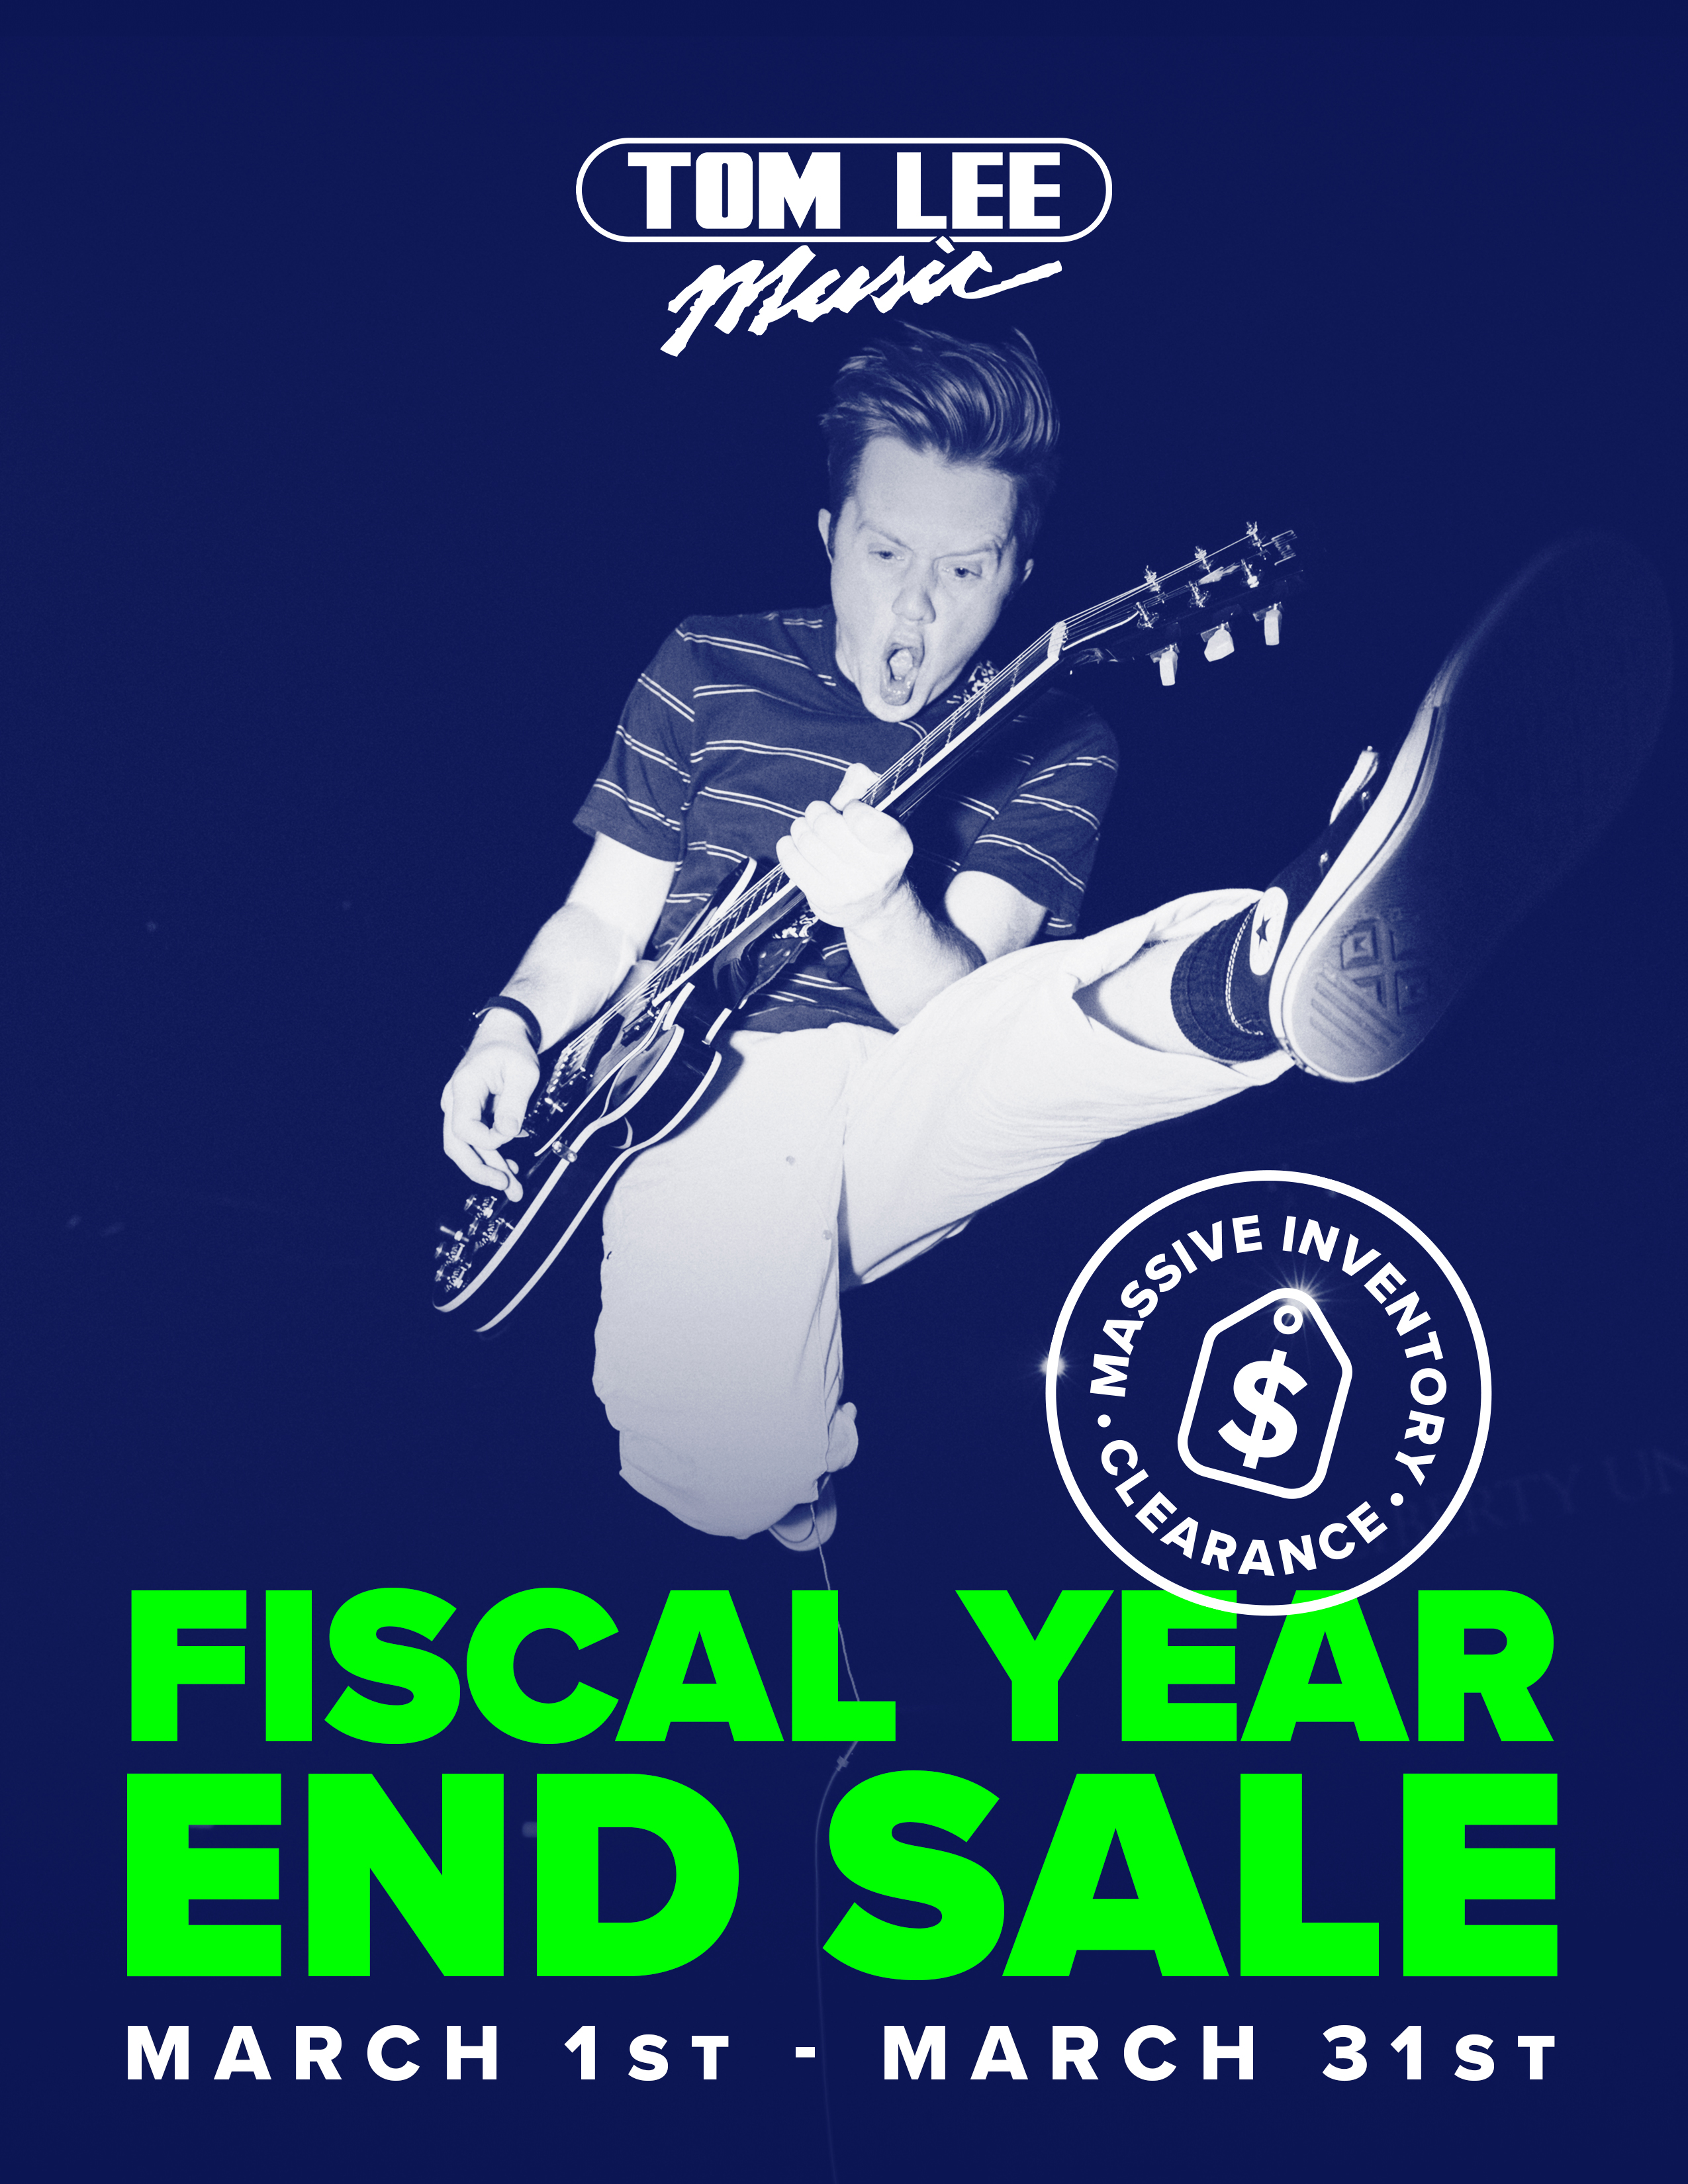 Fiscal Year End Sale